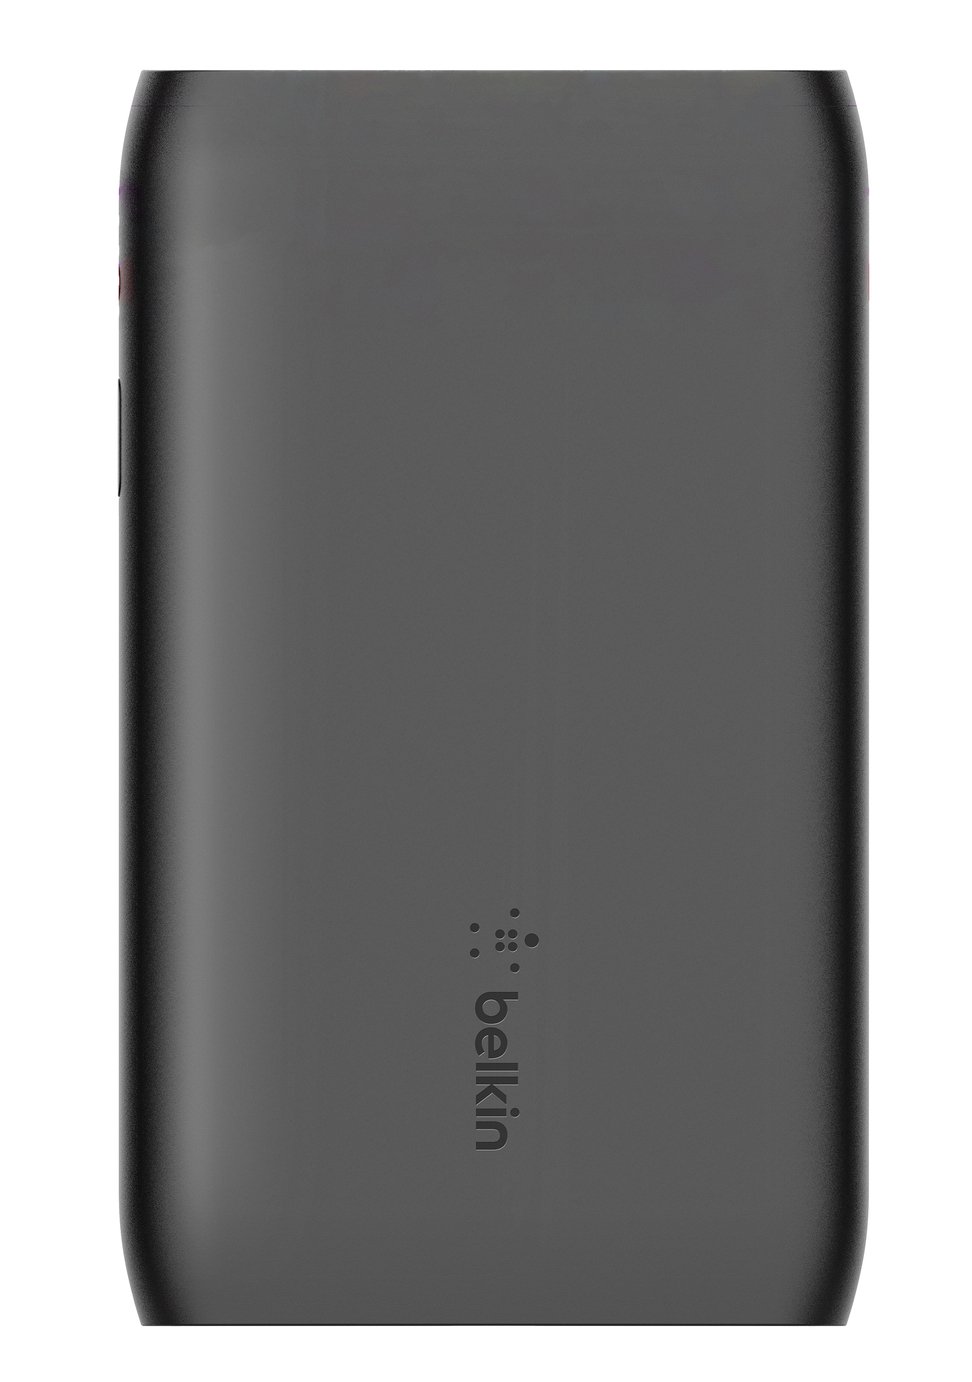 Belkin 5000mAh Power Bank Pre Charged Review